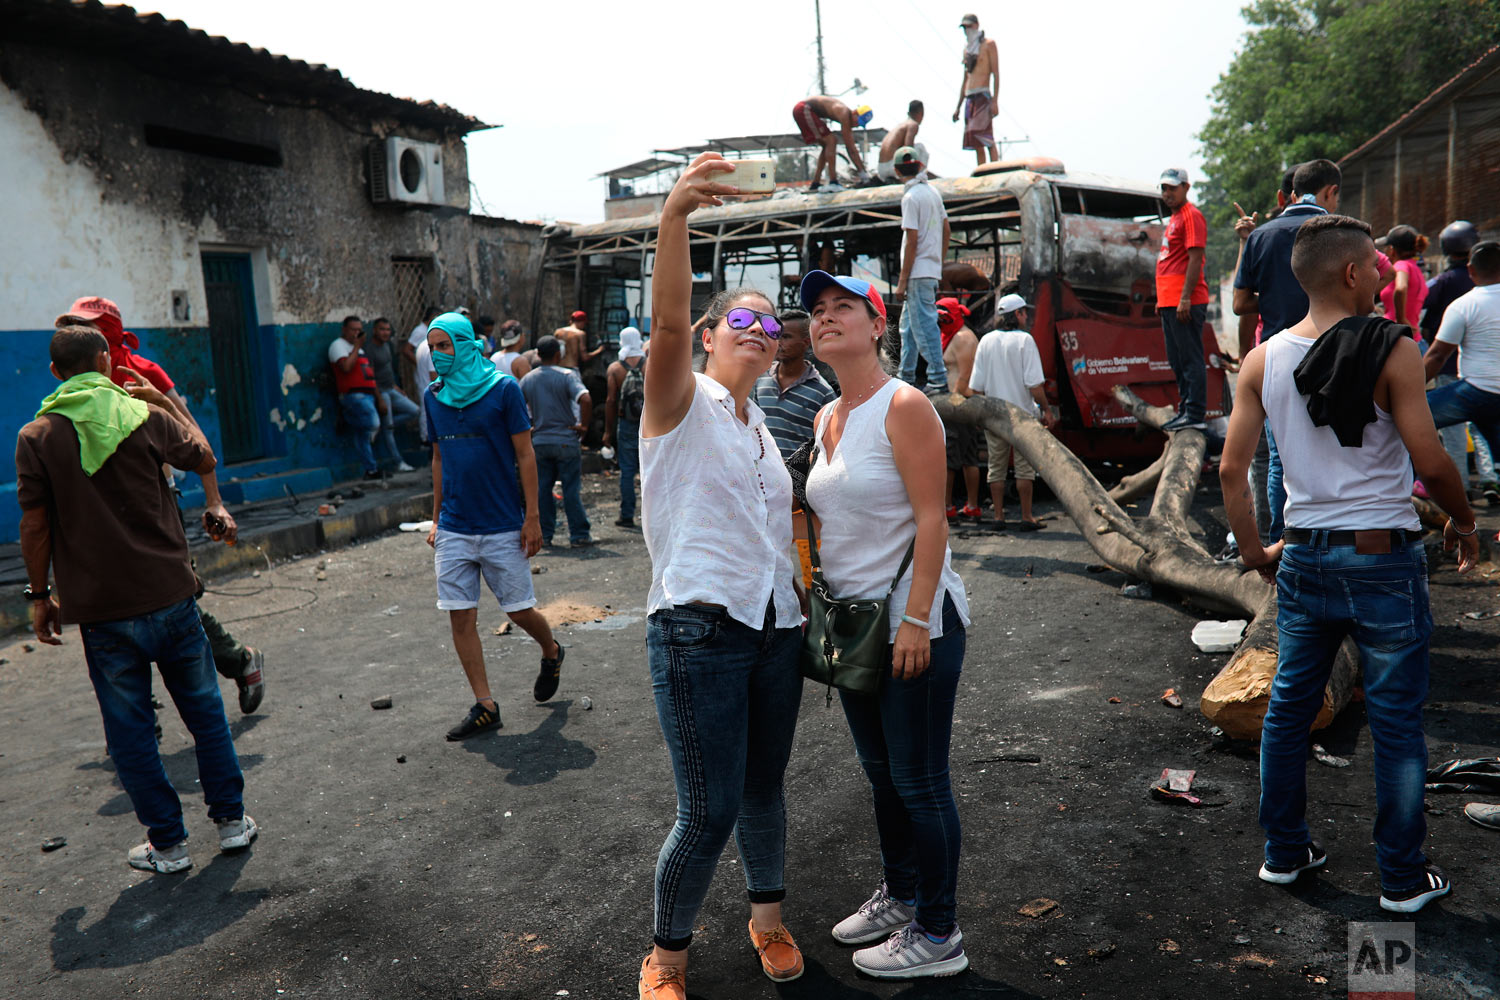  Opposition demonstrators take a selfie at the site where a torched bus is used as a barricade, during clashes with the Venezuelan Bolivarian National Guard in Urena, Venezuela, near the border with Colombia, Saturday, Feb. 23, 2019. (AP Photo/Rodrig